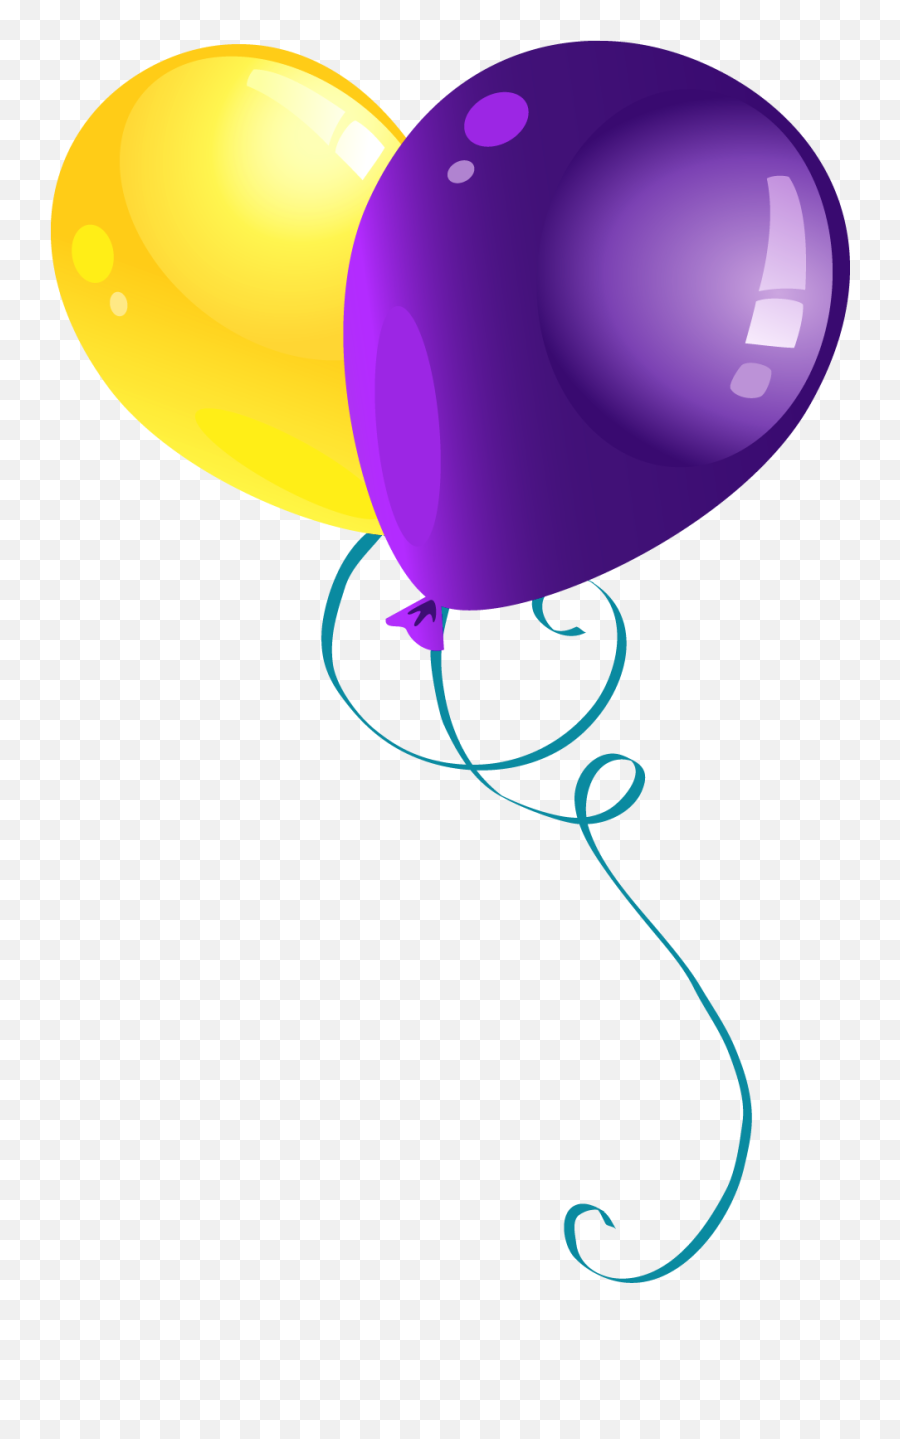 Faces Clipart Balloon Faces Balloon Transparent Free For - Purple And Yellow Balloons Png Emoji,Emojis Balloons